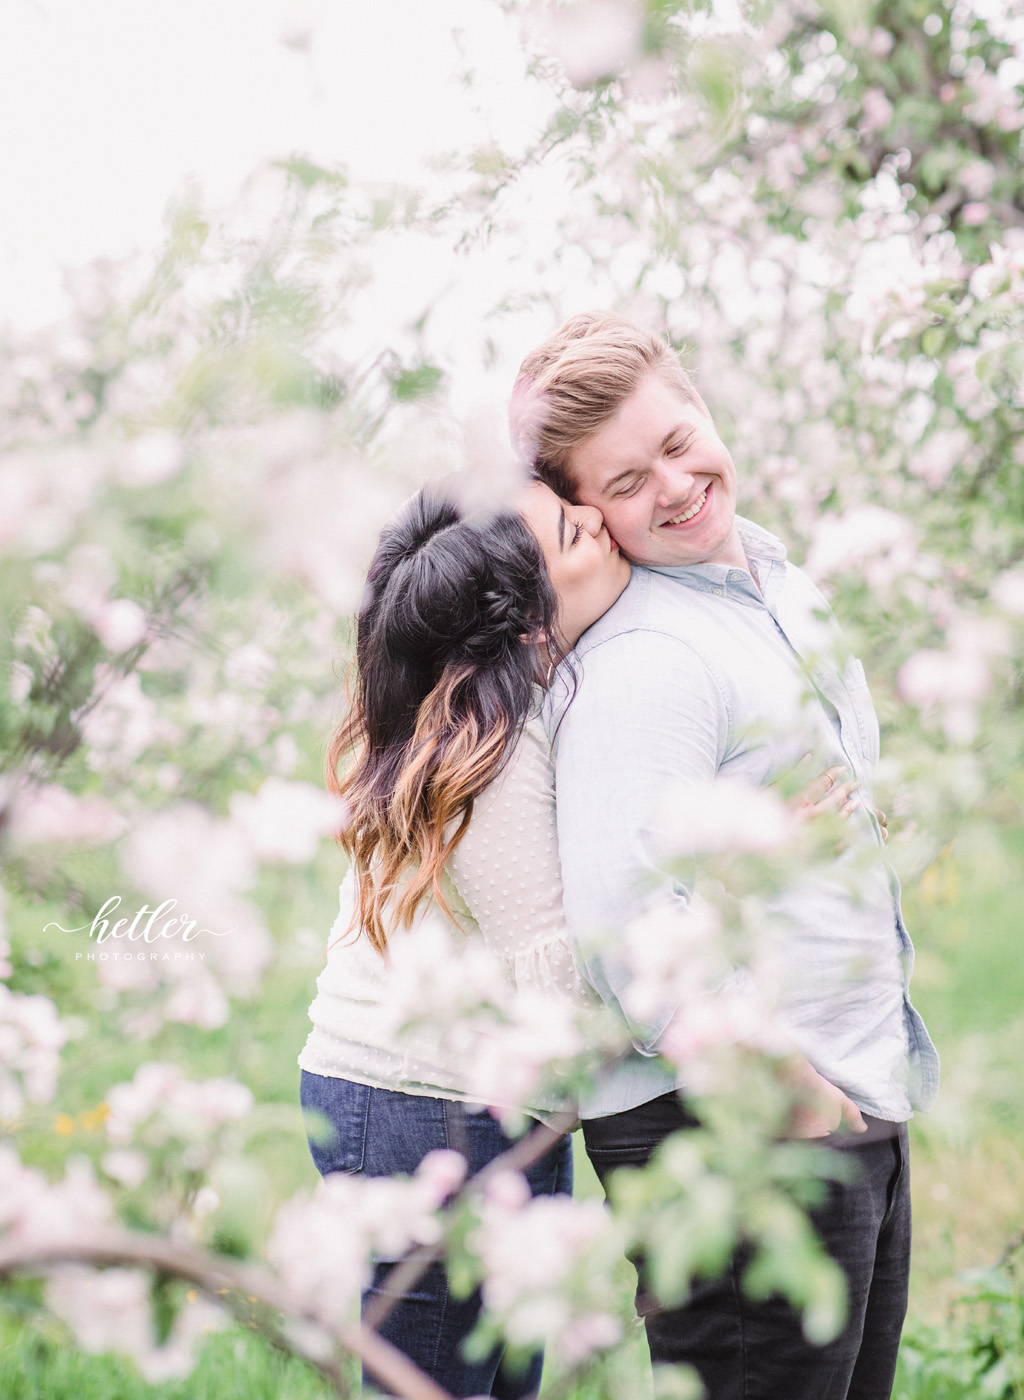 Grand Rapids spring engagement photos in apple blossoms Res Life worship team